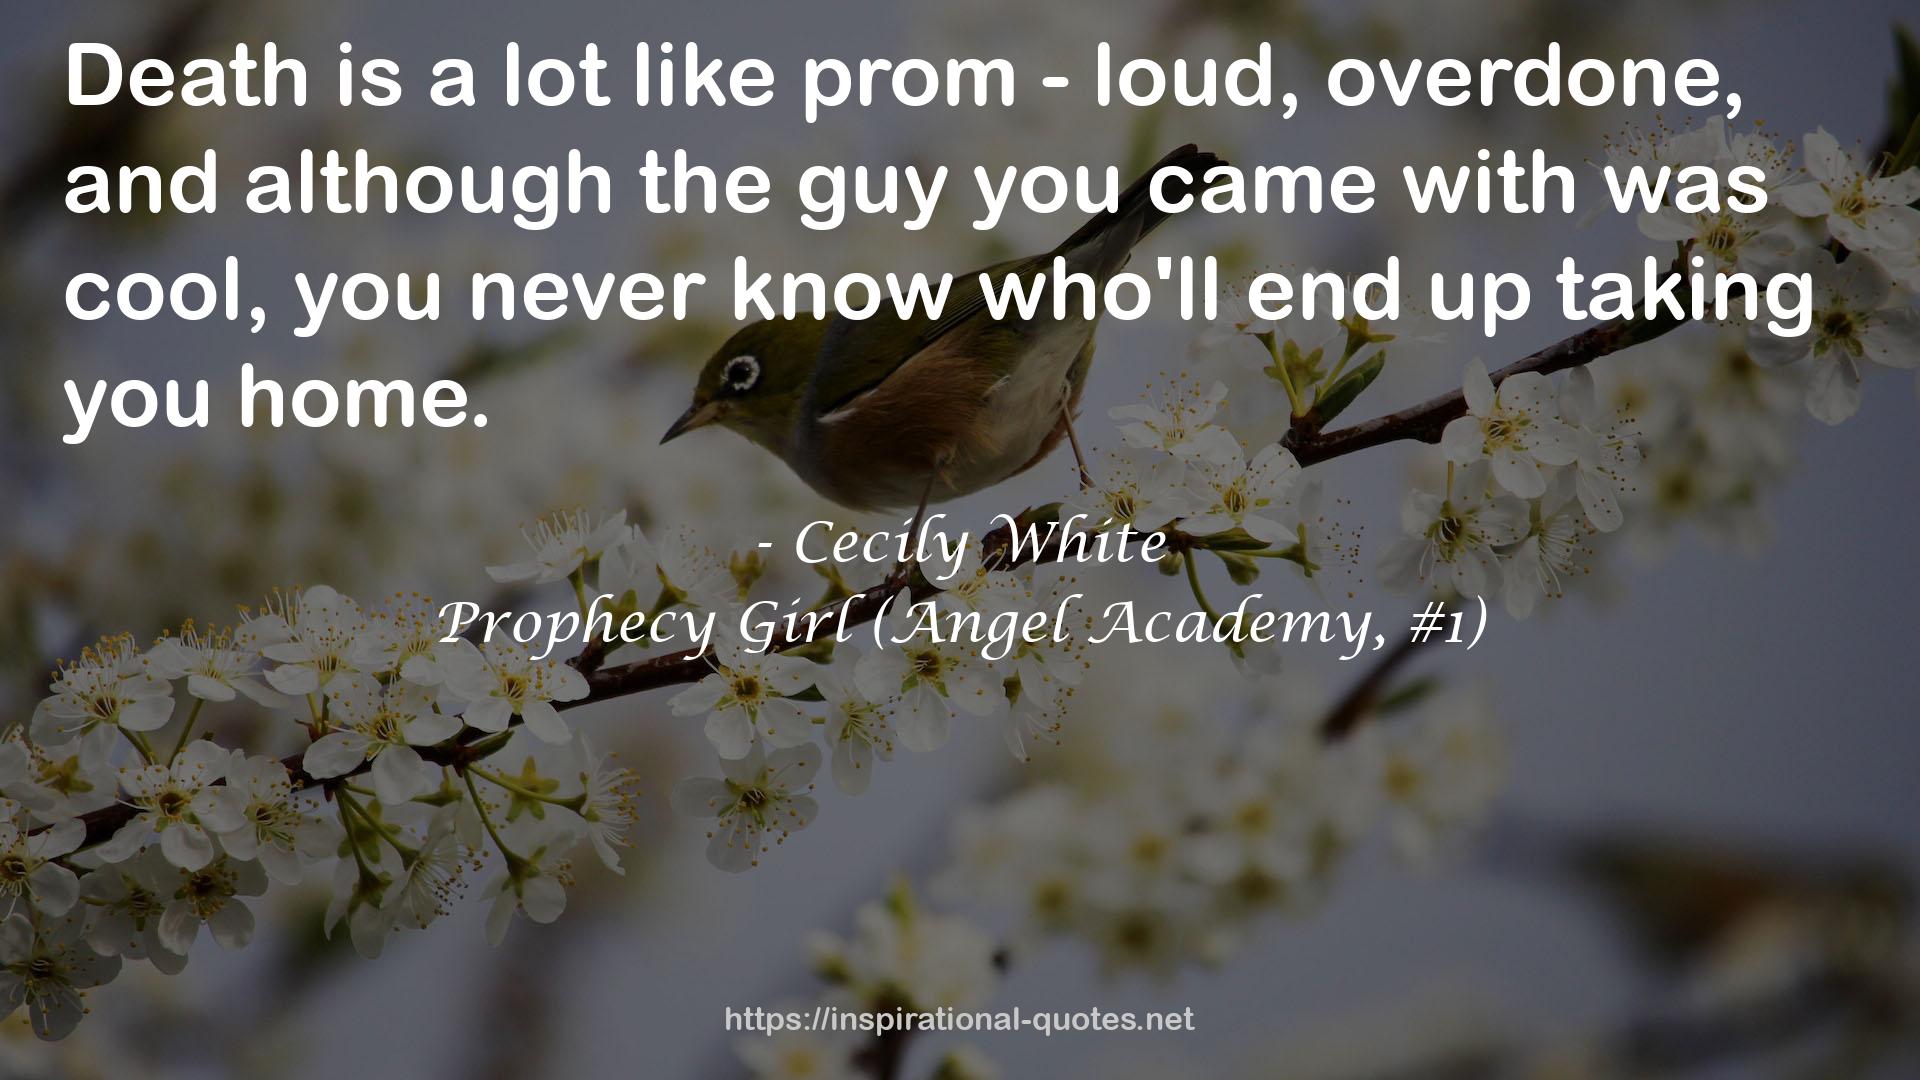 Prophecy Girl (Angel Academy, #1) QUOTES